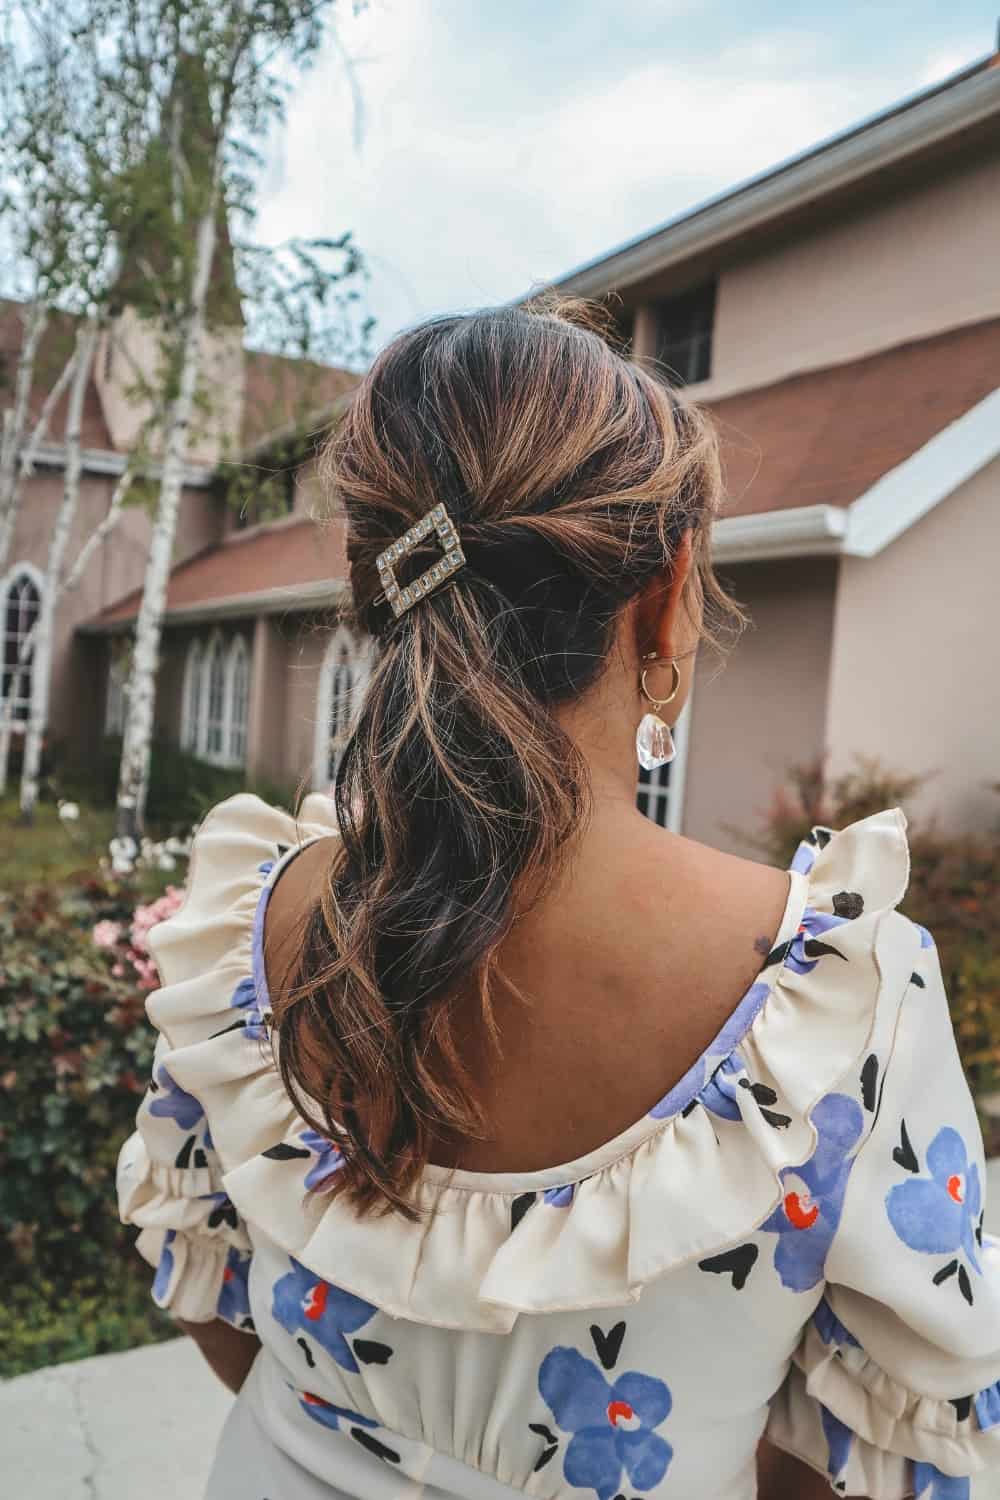 Party Hair Style for Long Hair - Tie back